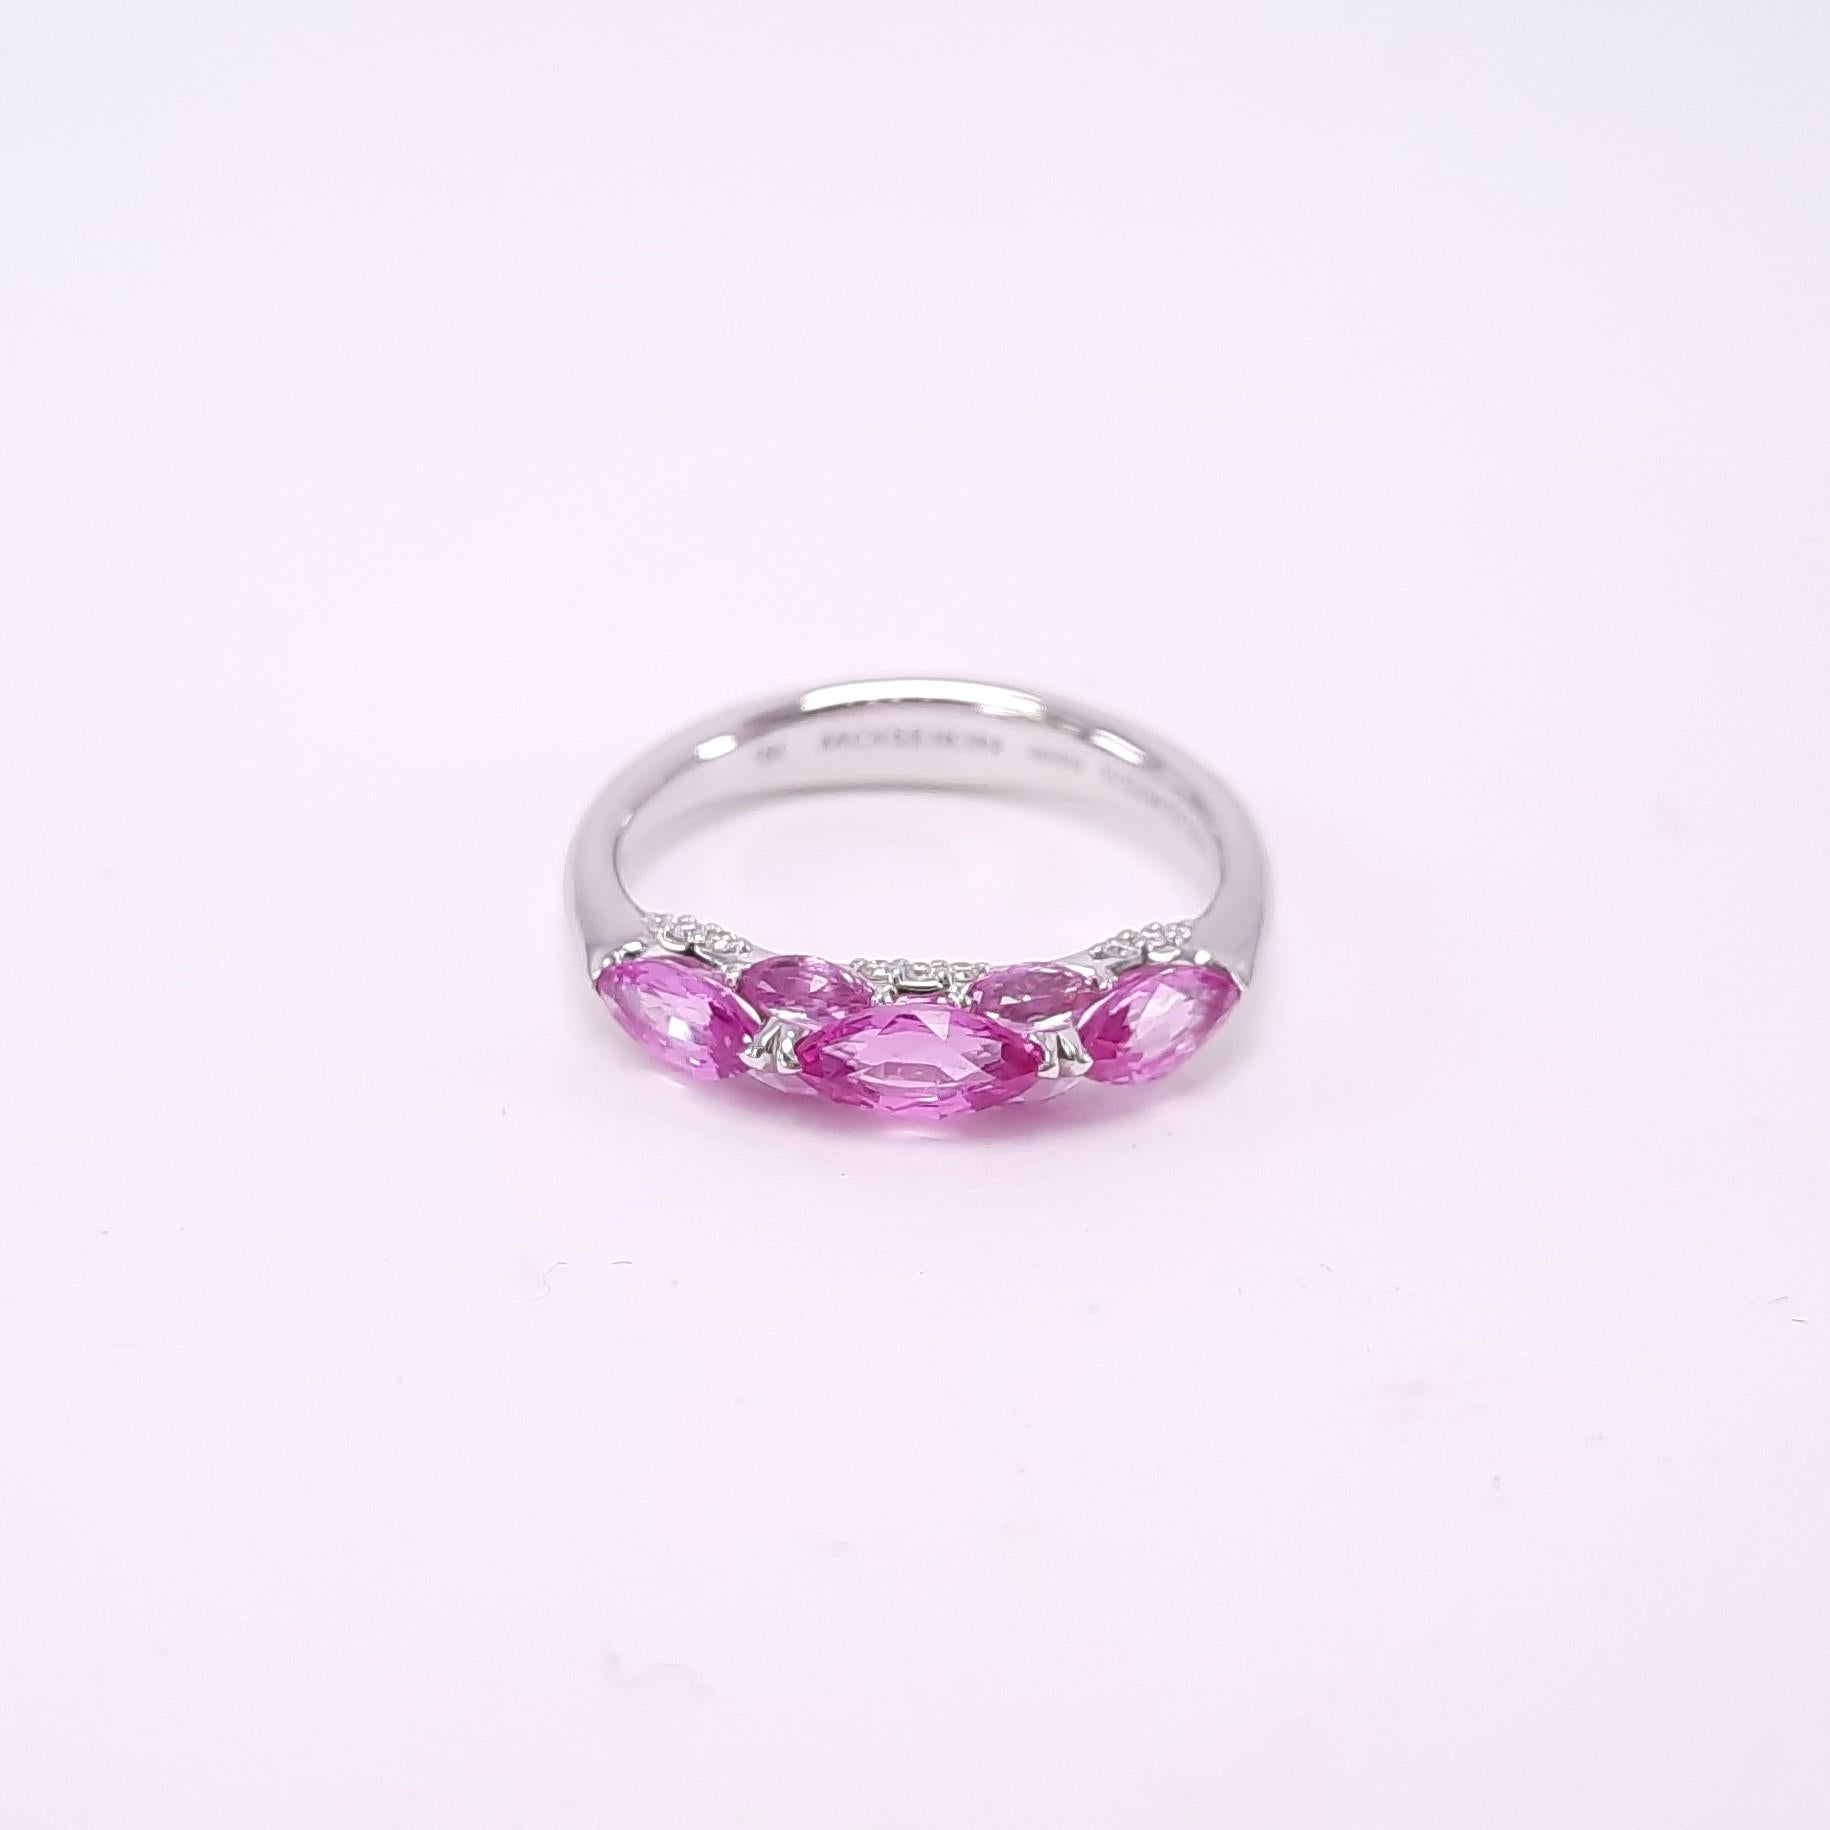 The Pink colour is forever tender, 
Slightly carefree, yet true and slender.
Pure and kind, without a blemish,
Innocent, yet from the heart, it's near.
Viktor Moisiekin

MOISEIKIN's elegant and feminine ring from the new Harmony Collection